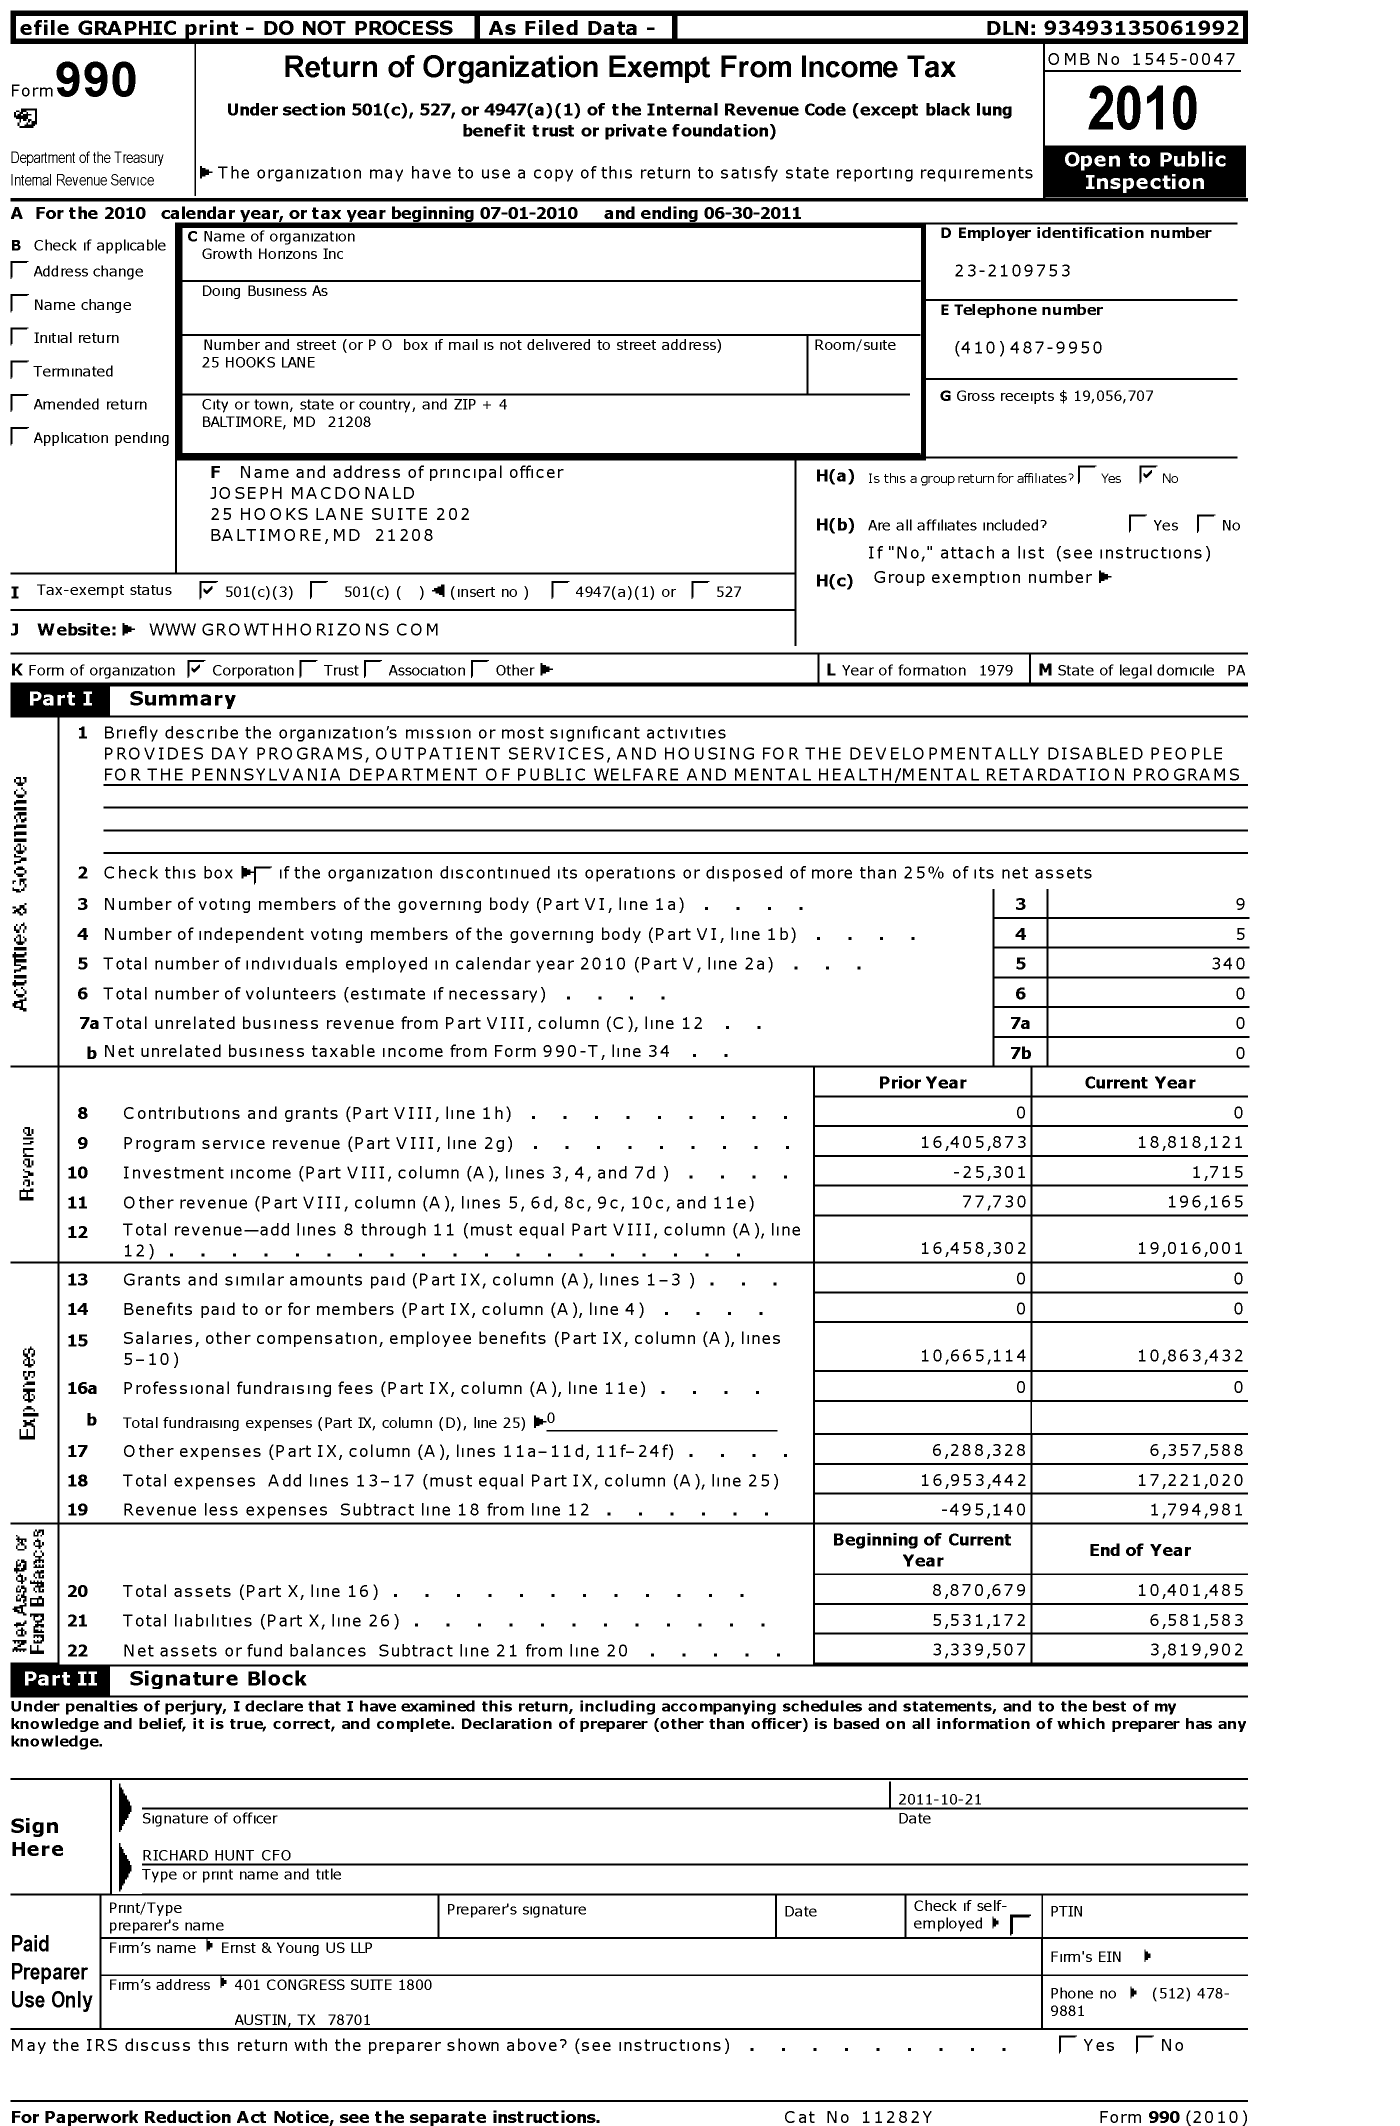 Image of first page of 2010 Form 990 for Growth Horizons